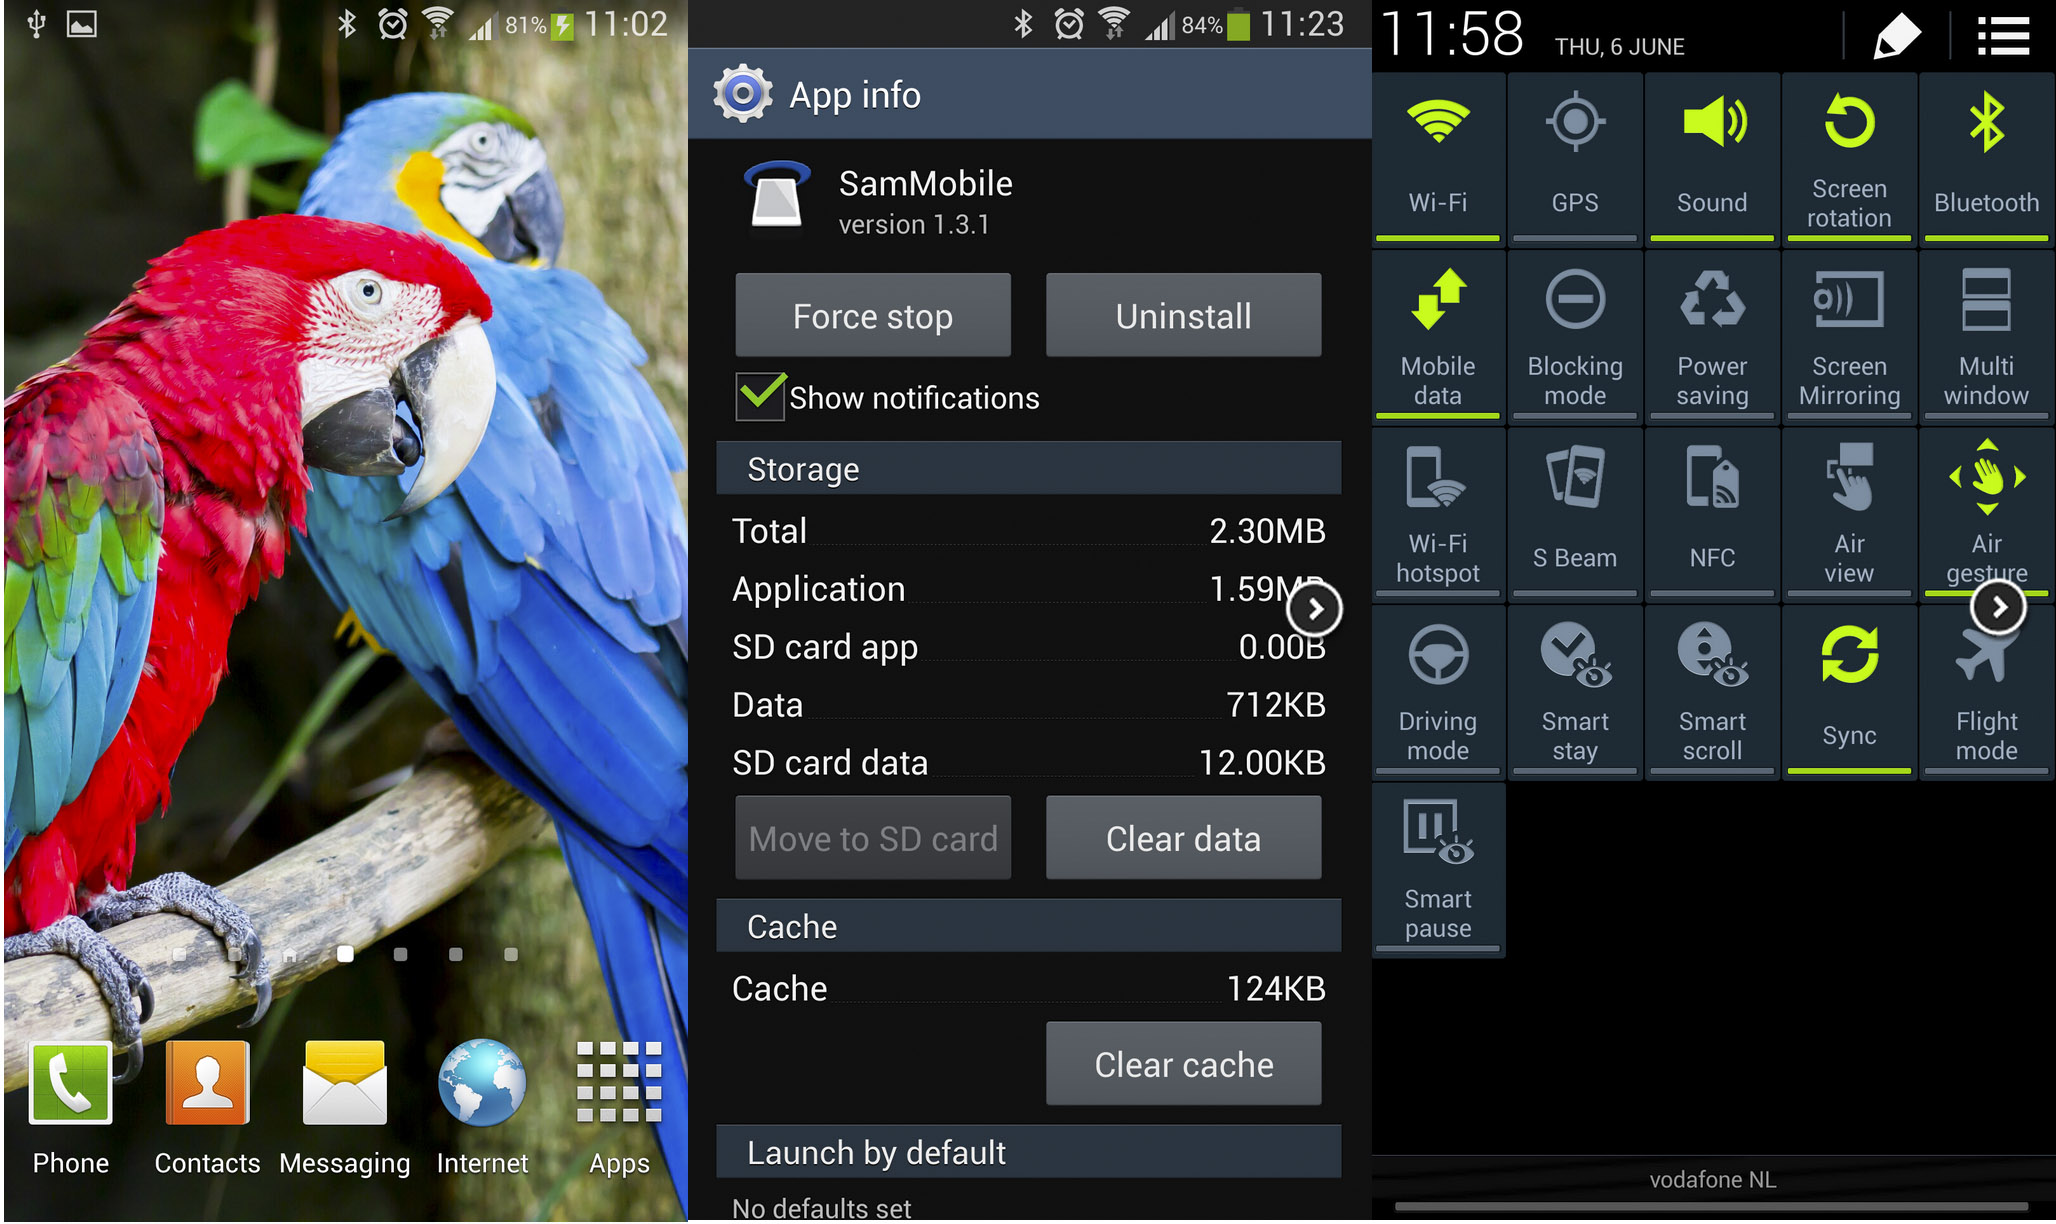 Root and install twrp recovery on samsung galaxy s4 gt-i9500 (jb/ kk/ lollipop)